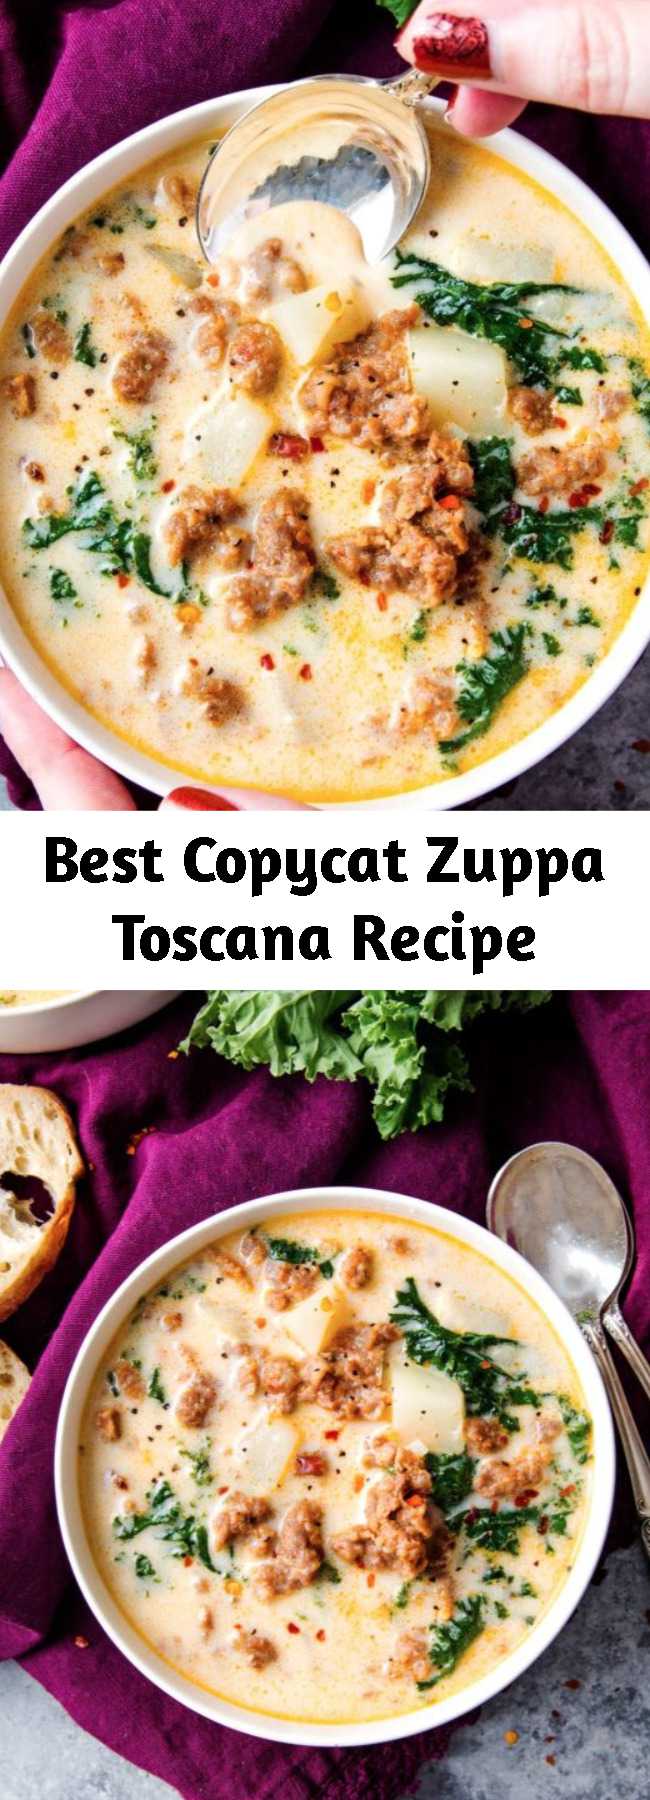 Best Copycat Zuppa Toscana Recipe - Classic zuppa toscana soup, in slow cooker form!  It tastes WAY better than the restaurant version, and is sure to be a crowd pleaser!